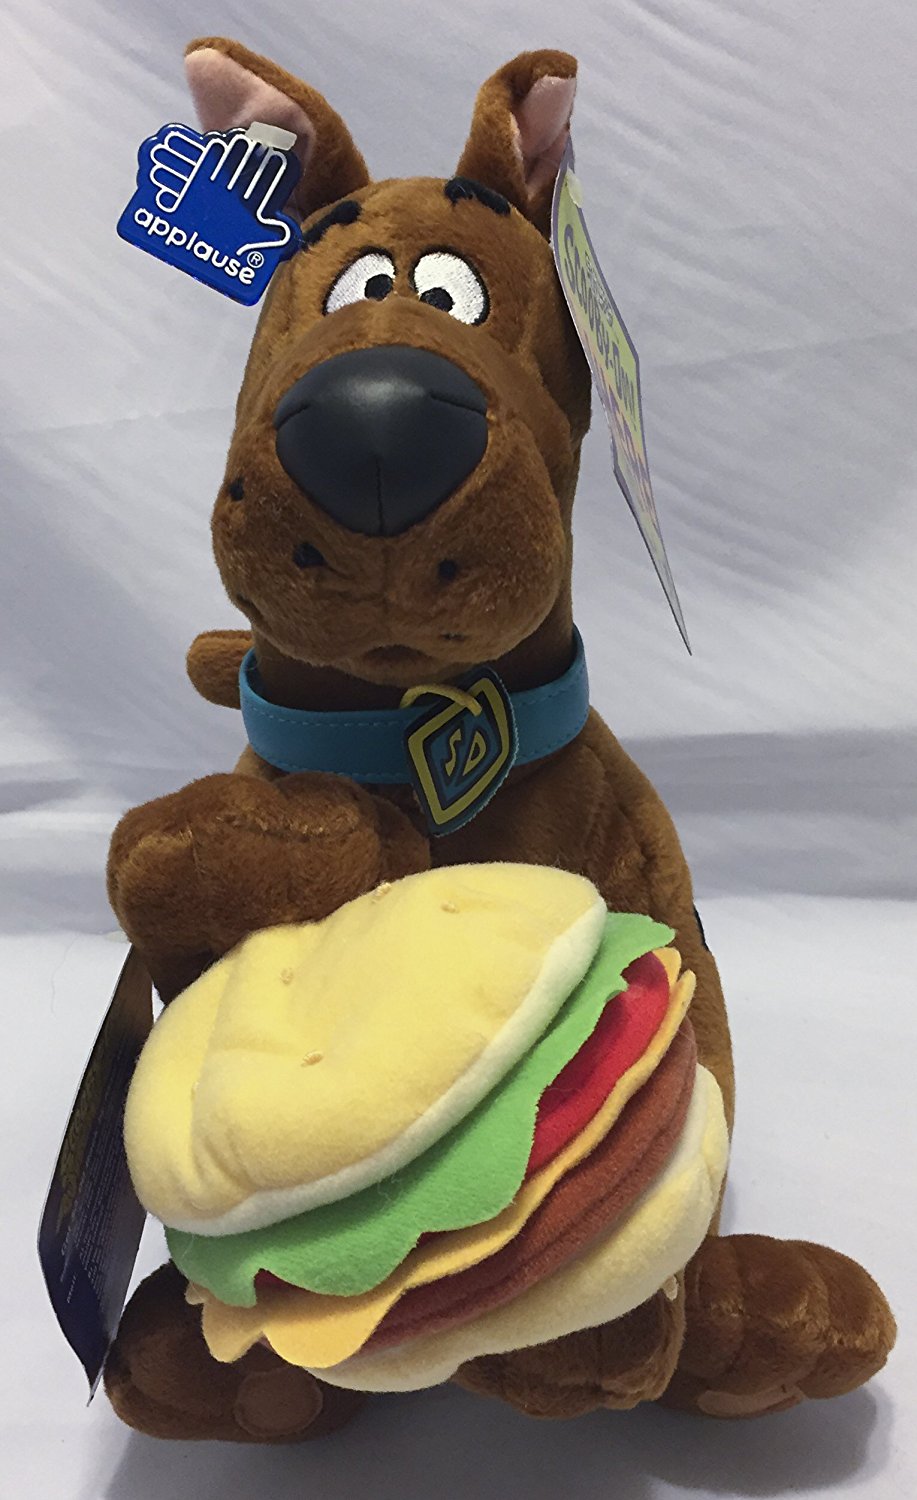 Collectible Scooby Doo Plush from small to large and wearing many attractive outfits for sports and more.